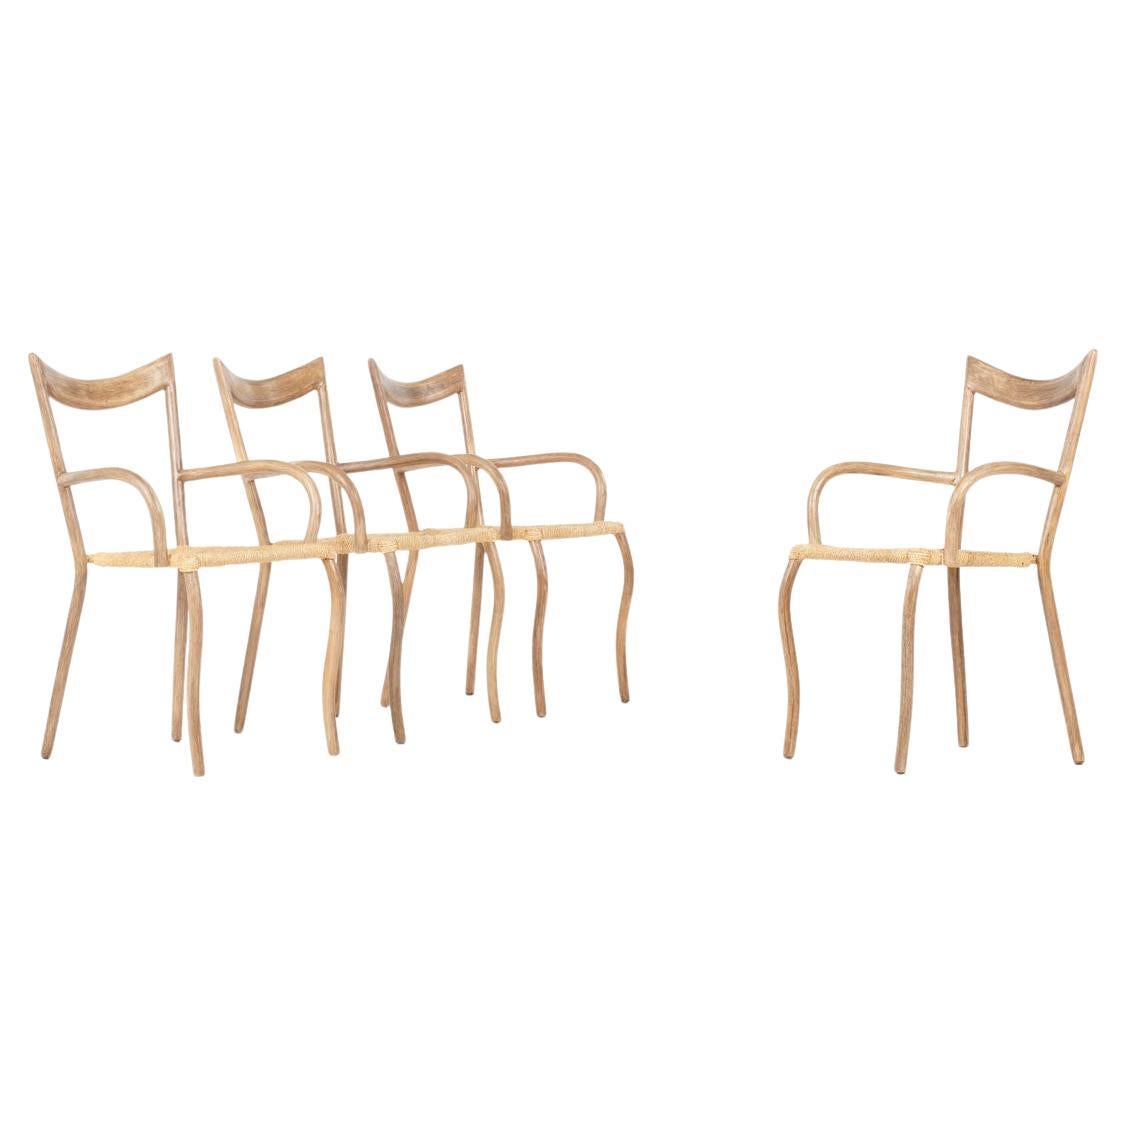 Set of 4 Manila chairs by Val Padilla for Jasper Conran 1970 For Sale